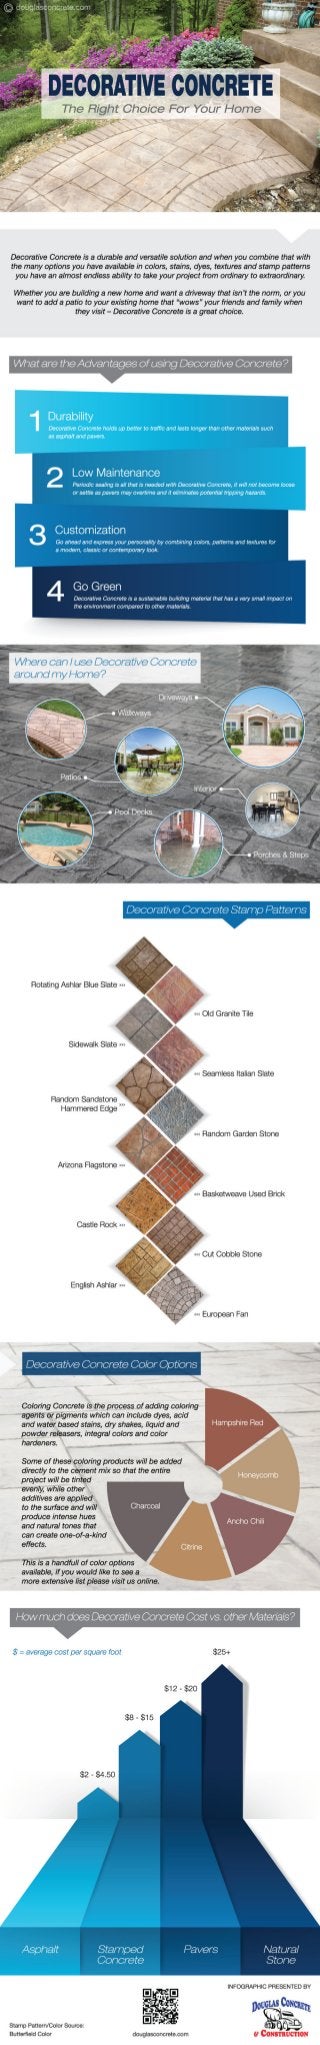 An Infographic on Decorative Concrete for Home